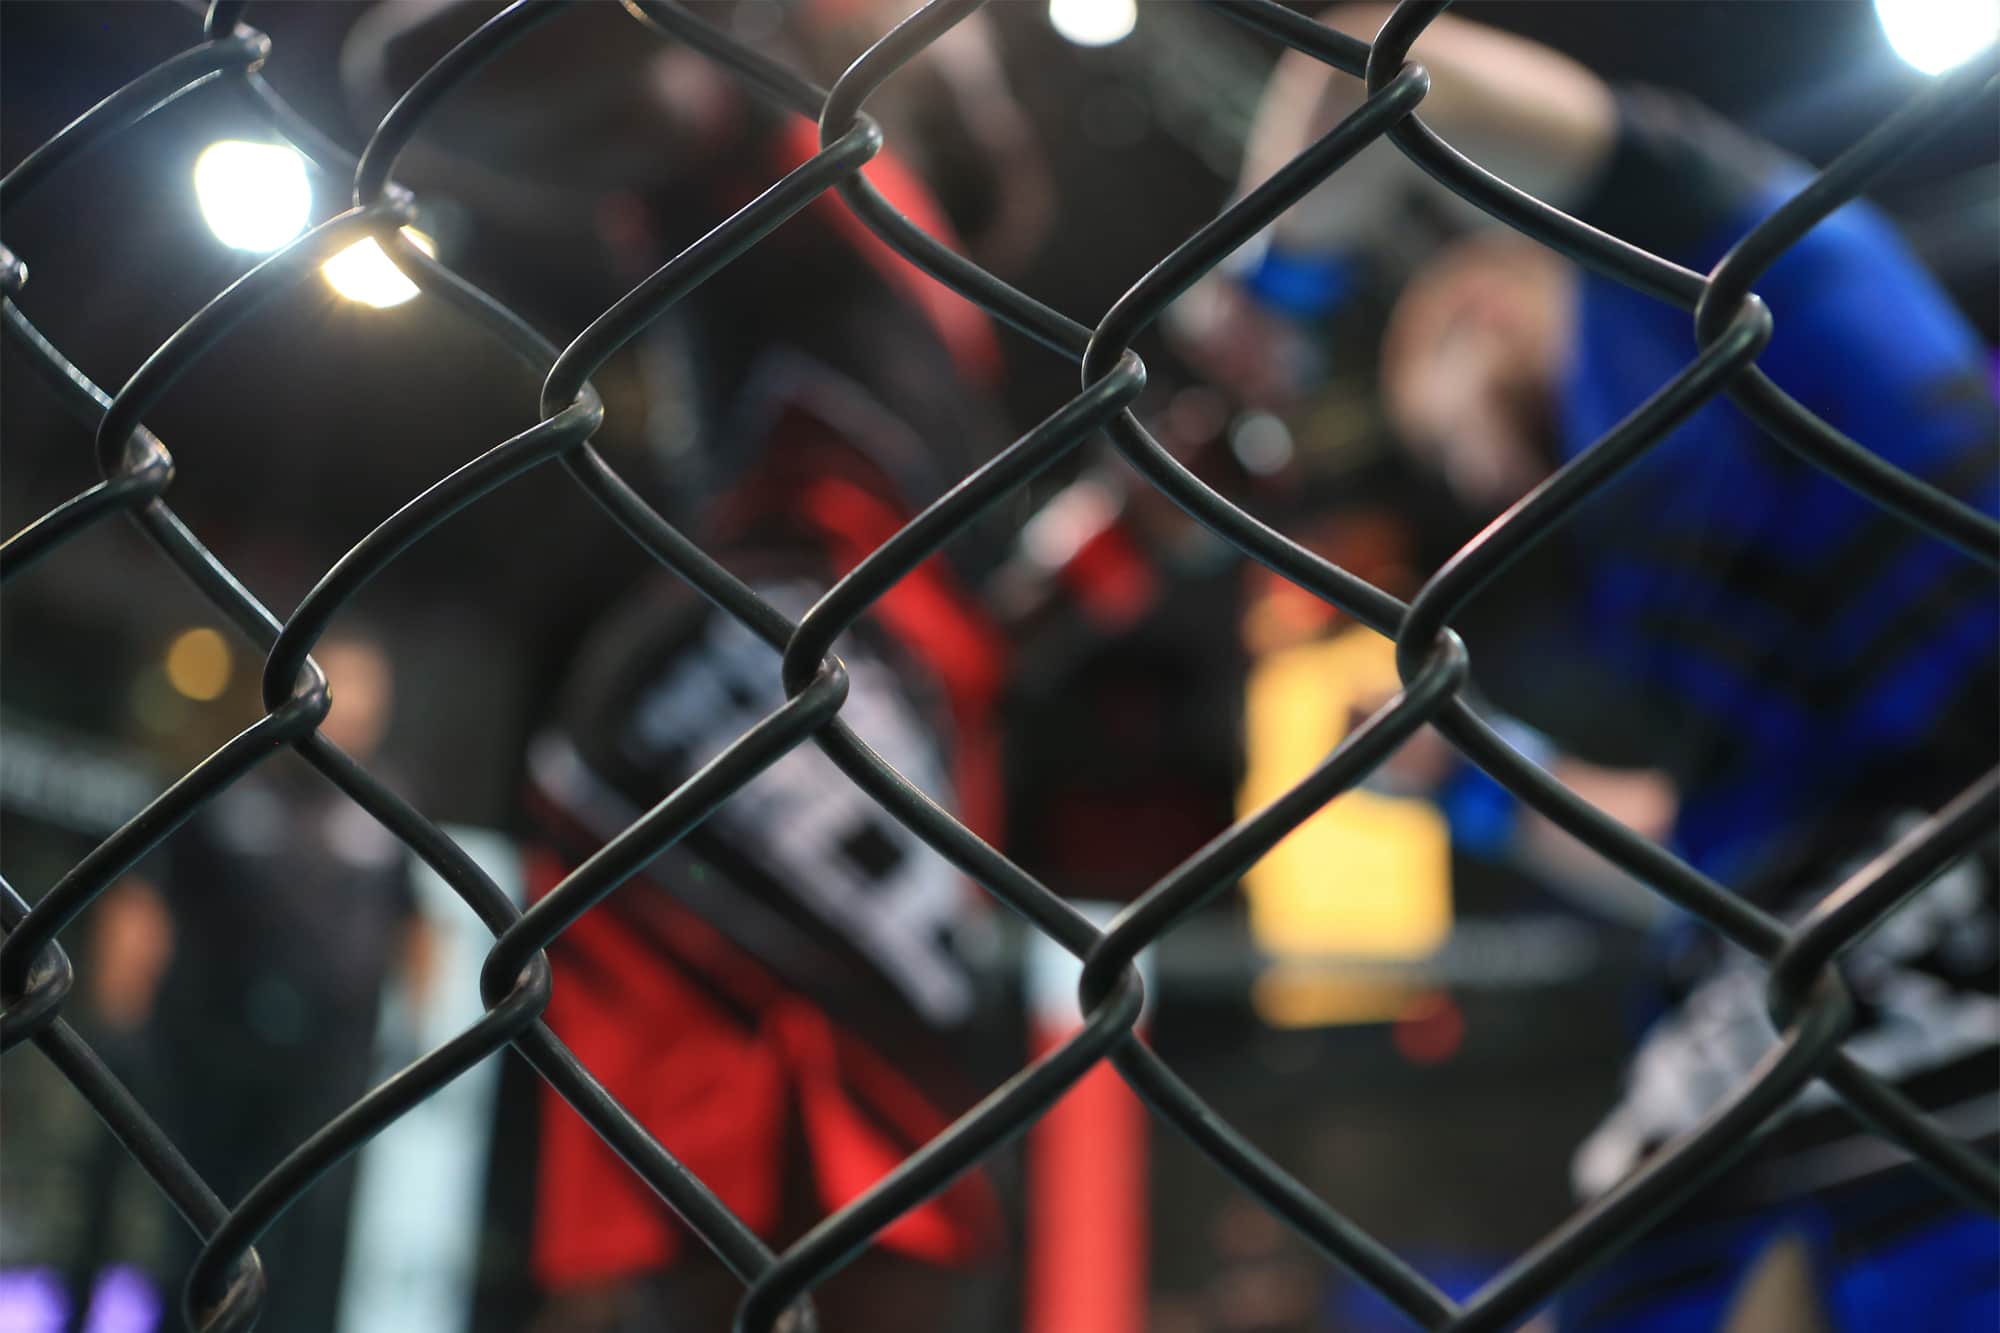 Former IMMAF competitors set to compete against each other at Titan FC 69